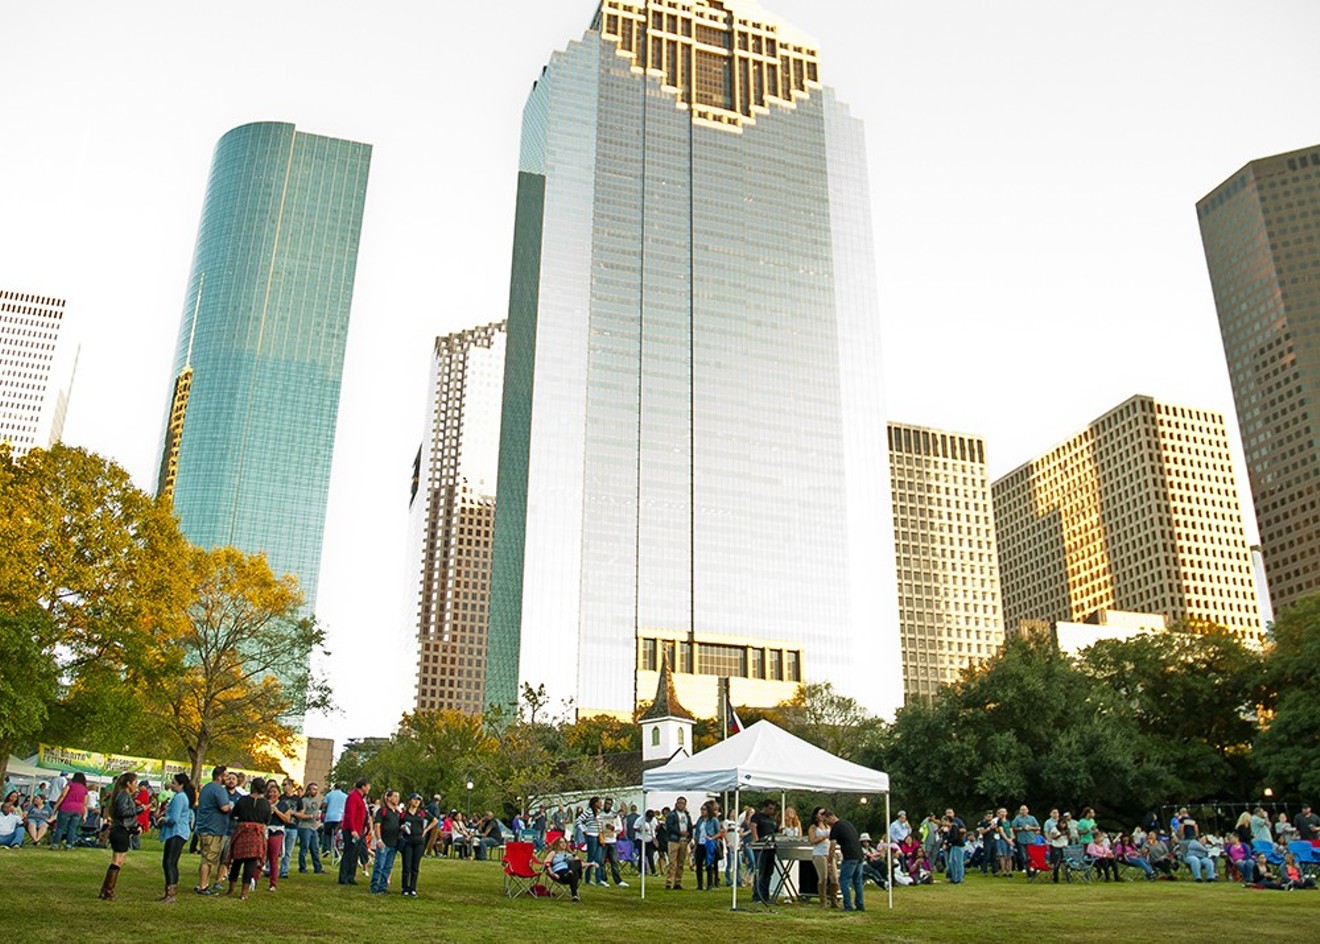 The sixth annual Houston Margarita Festival takes place at The Water Works at Buffalo Bayou Park.